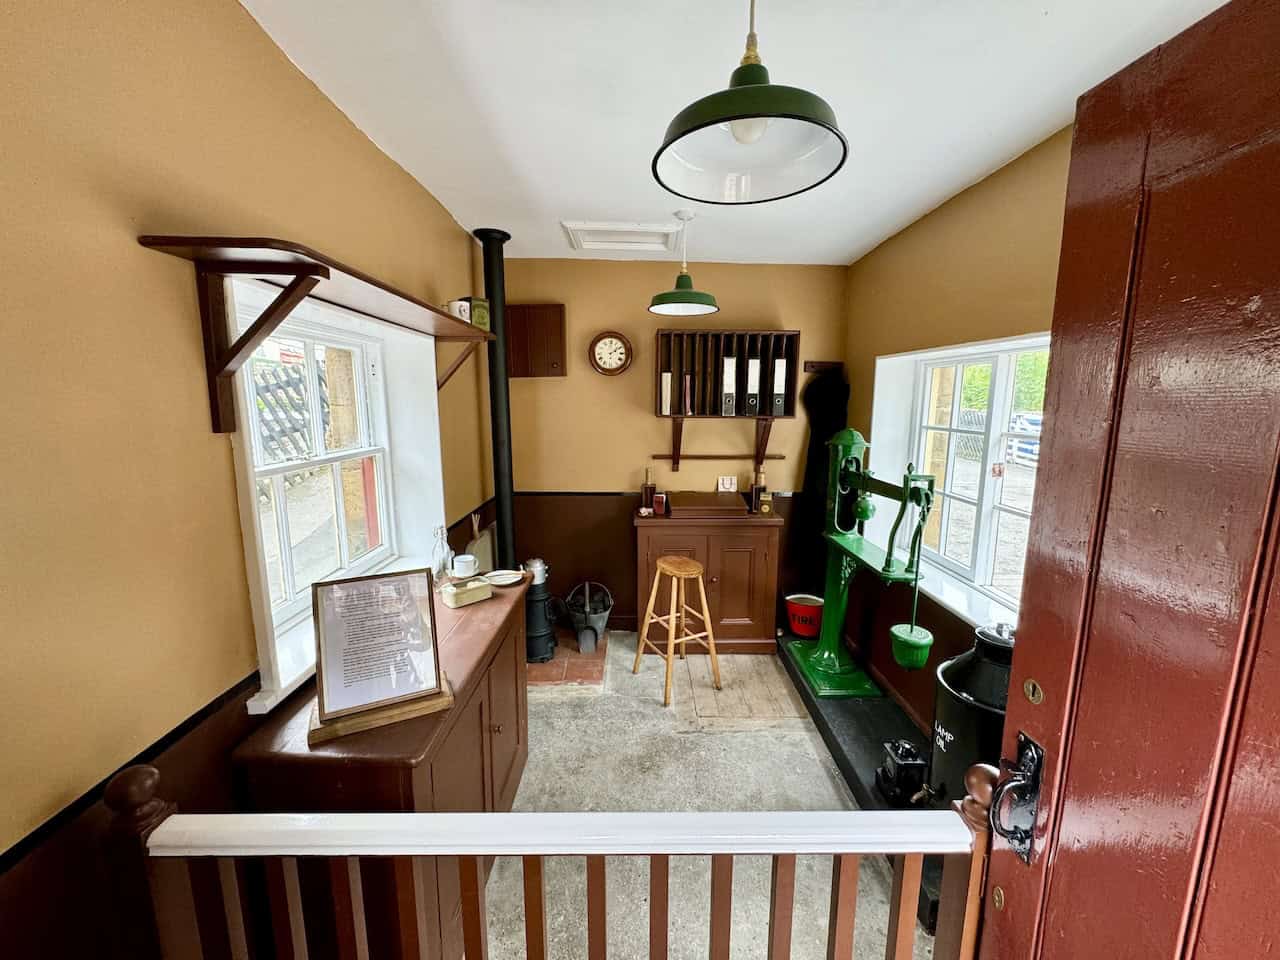 Restored weighbridge office built as part of the original station in 1865. It has served multiple purposes over the years, including a station shop and ticket office. Restoration started in 2019 to depict the office as it might have looked around 1922.